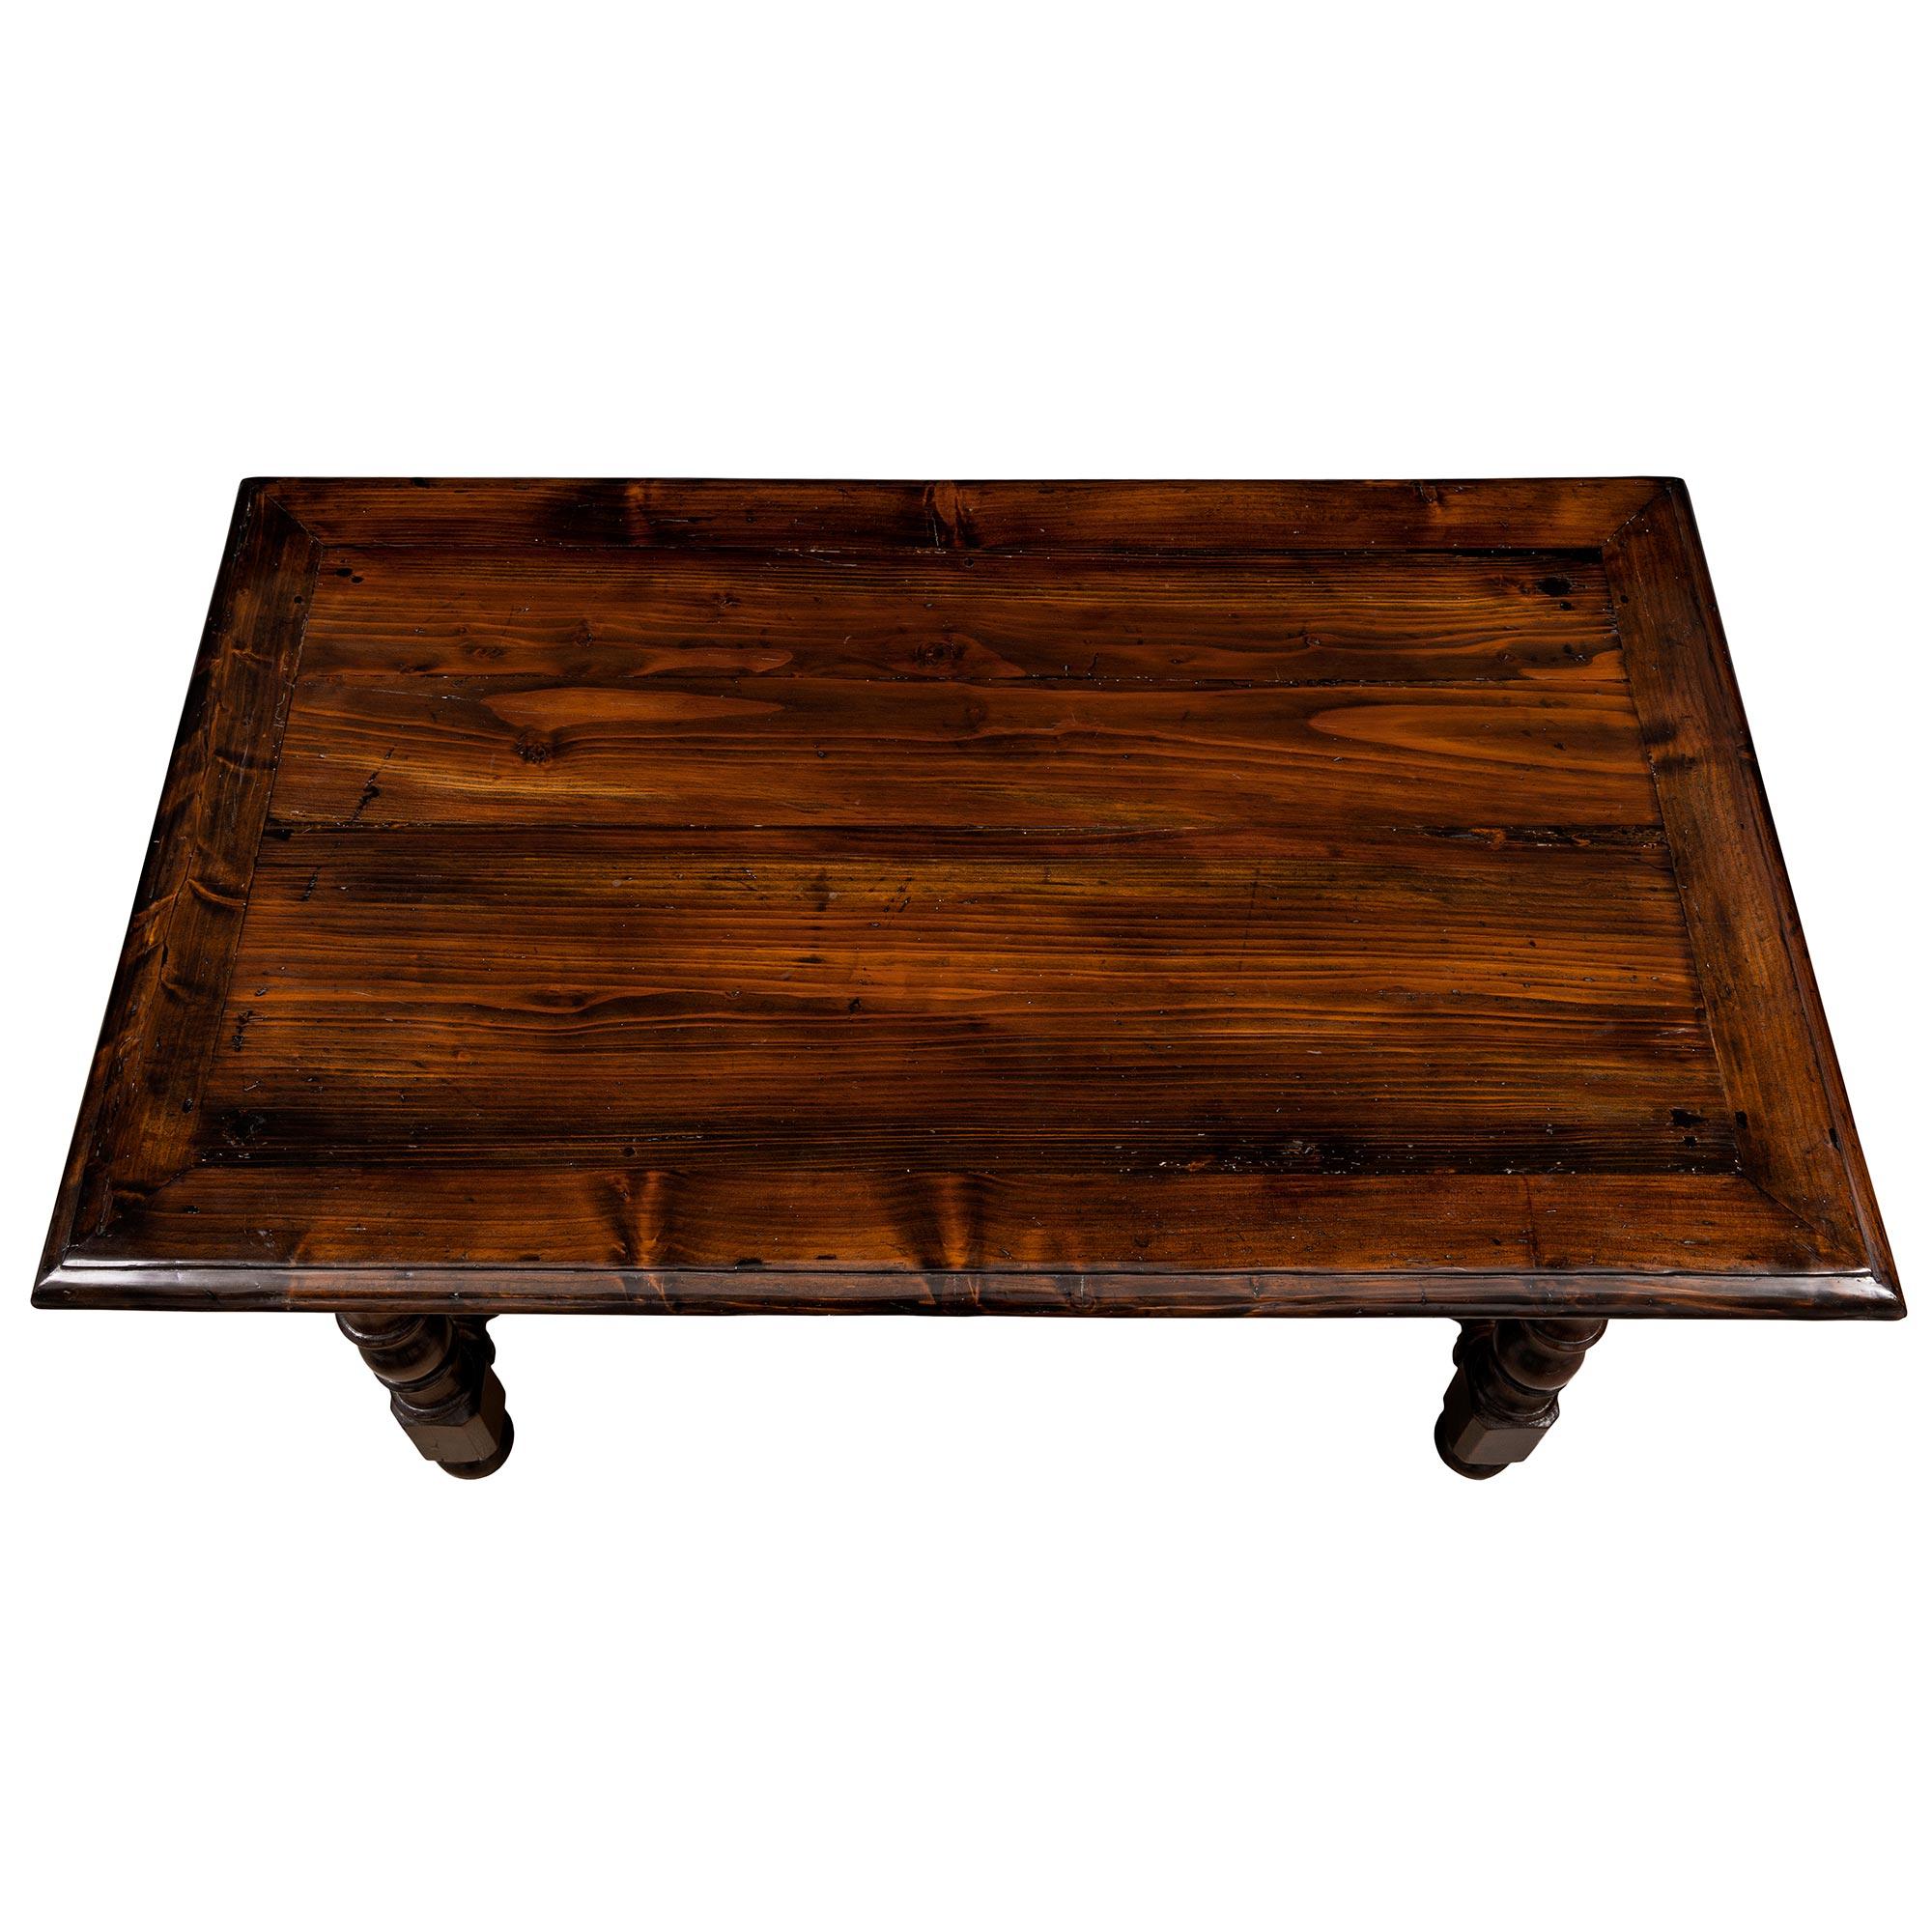 A handsome country French 19th century Louis XVI style dark oak center table. The table is raised by lovely ball feet below impressive turned legs with block reserves. Each leg is connected by a most decorative turned stretcher with a lovely central